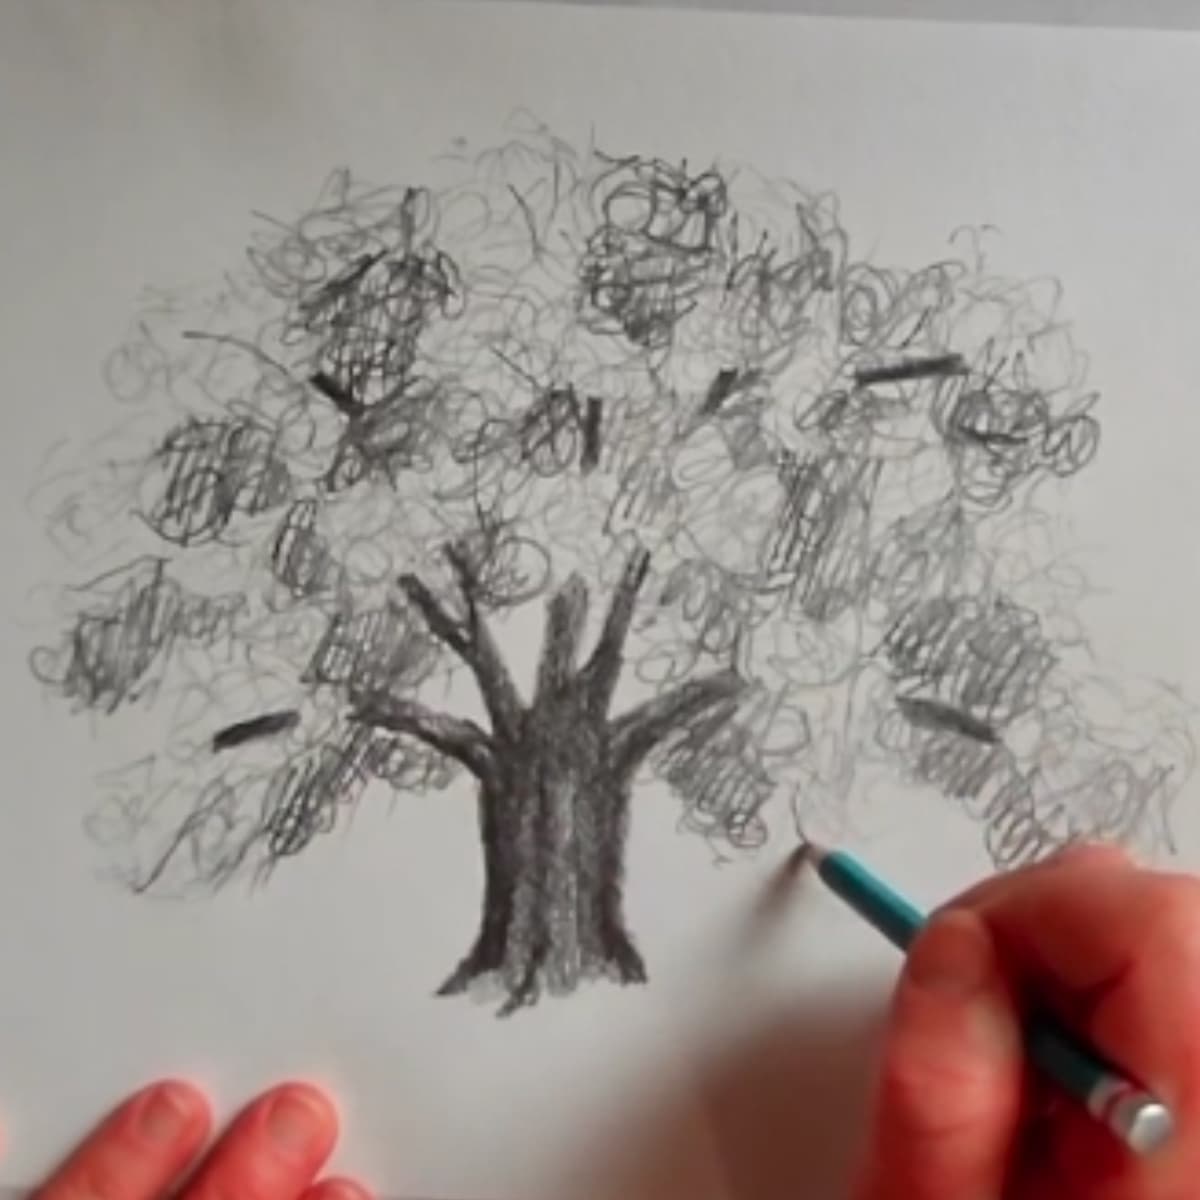 Sketch of a tree with hatching and scribble hatching to shade with the artist's hands and pencil.